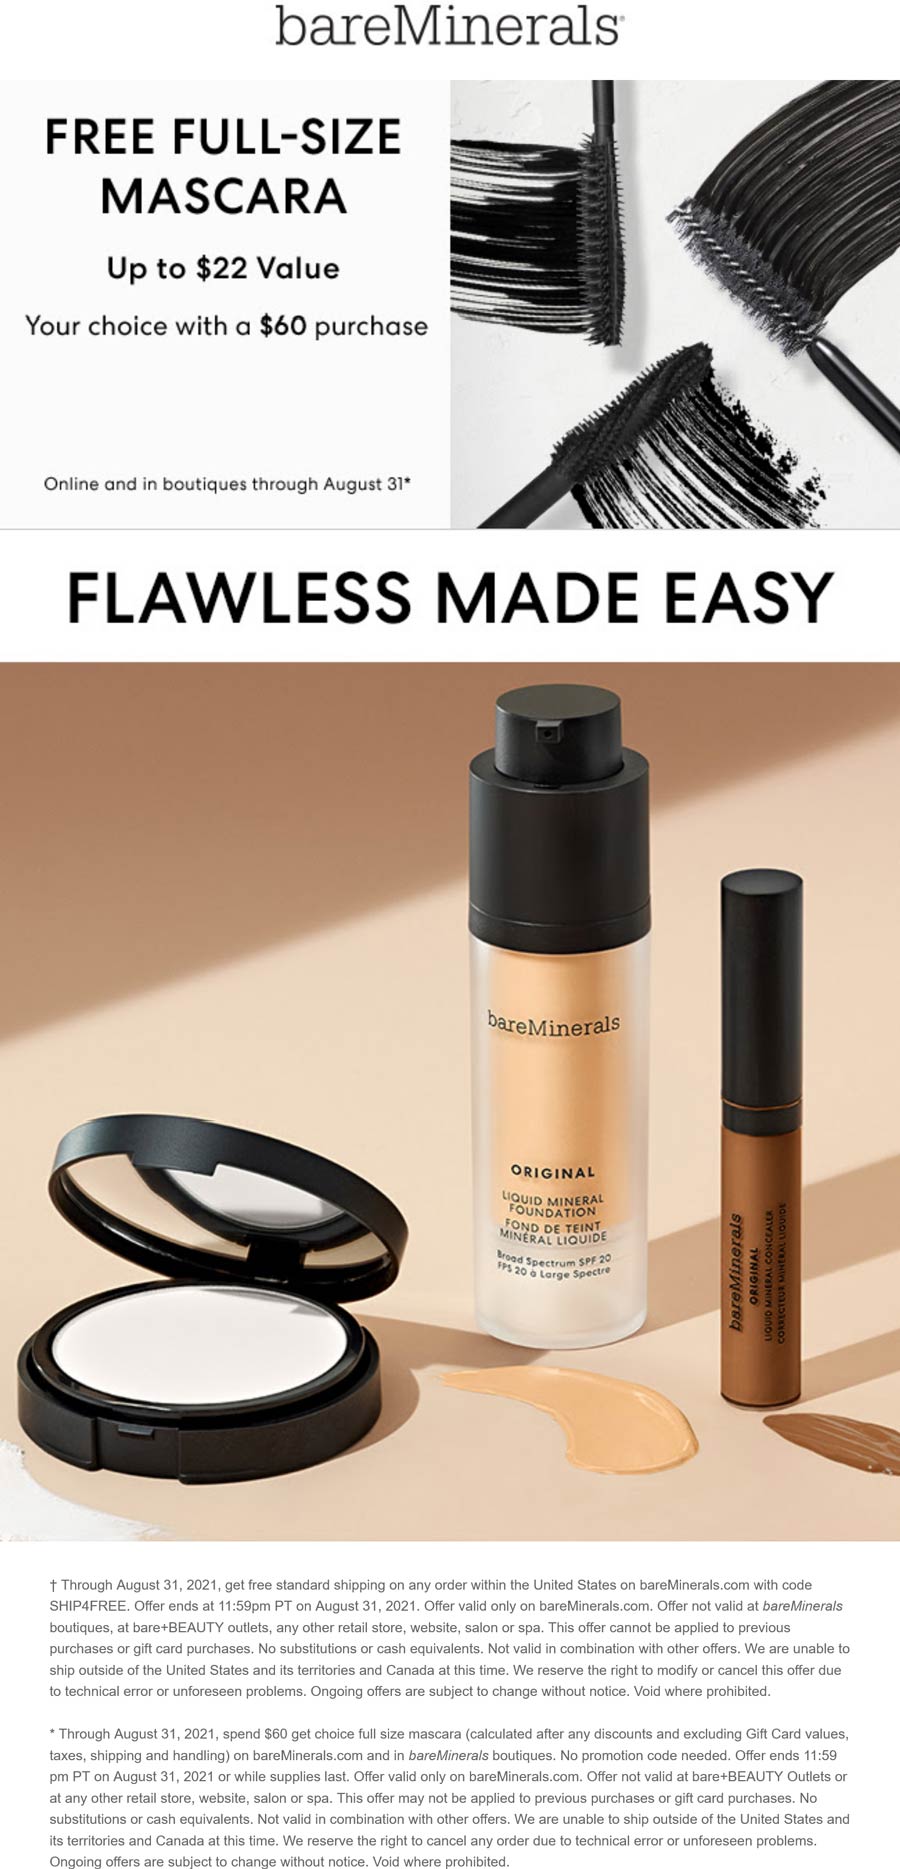 bareMinerals stores Coupon  Free $22 mascara with $60 spent at bareMinerals, ditto online #bareminerals 